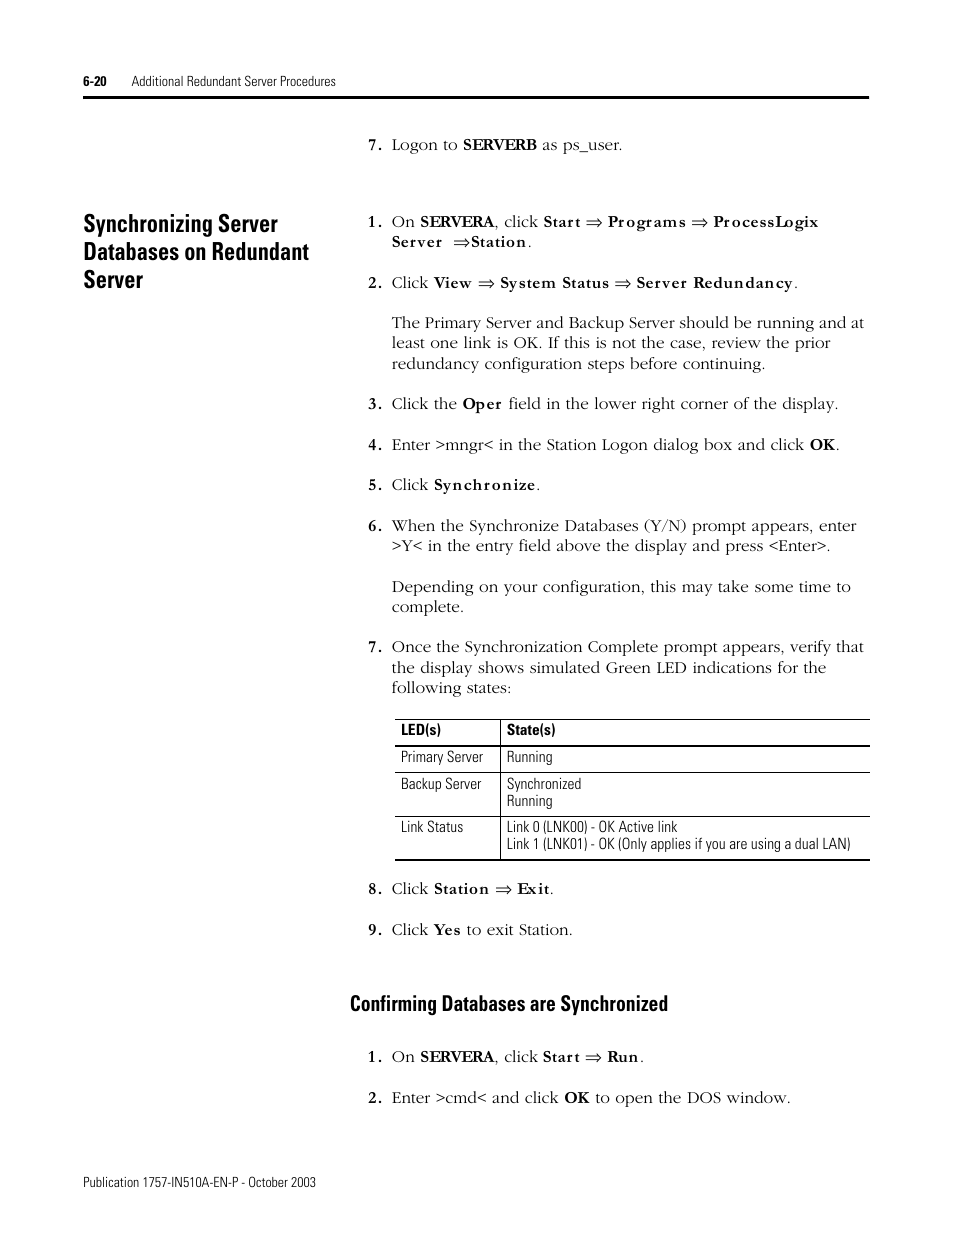 Synchronizing server databases on redundant server, Confirming databases are synchronized, Confirming databases are synchronized -20 | Rockwell Automation 1757-SWKIT5100 ProcessLogix R510.0 Installation and Upgrade Guide User Manual | Page 180 / 271